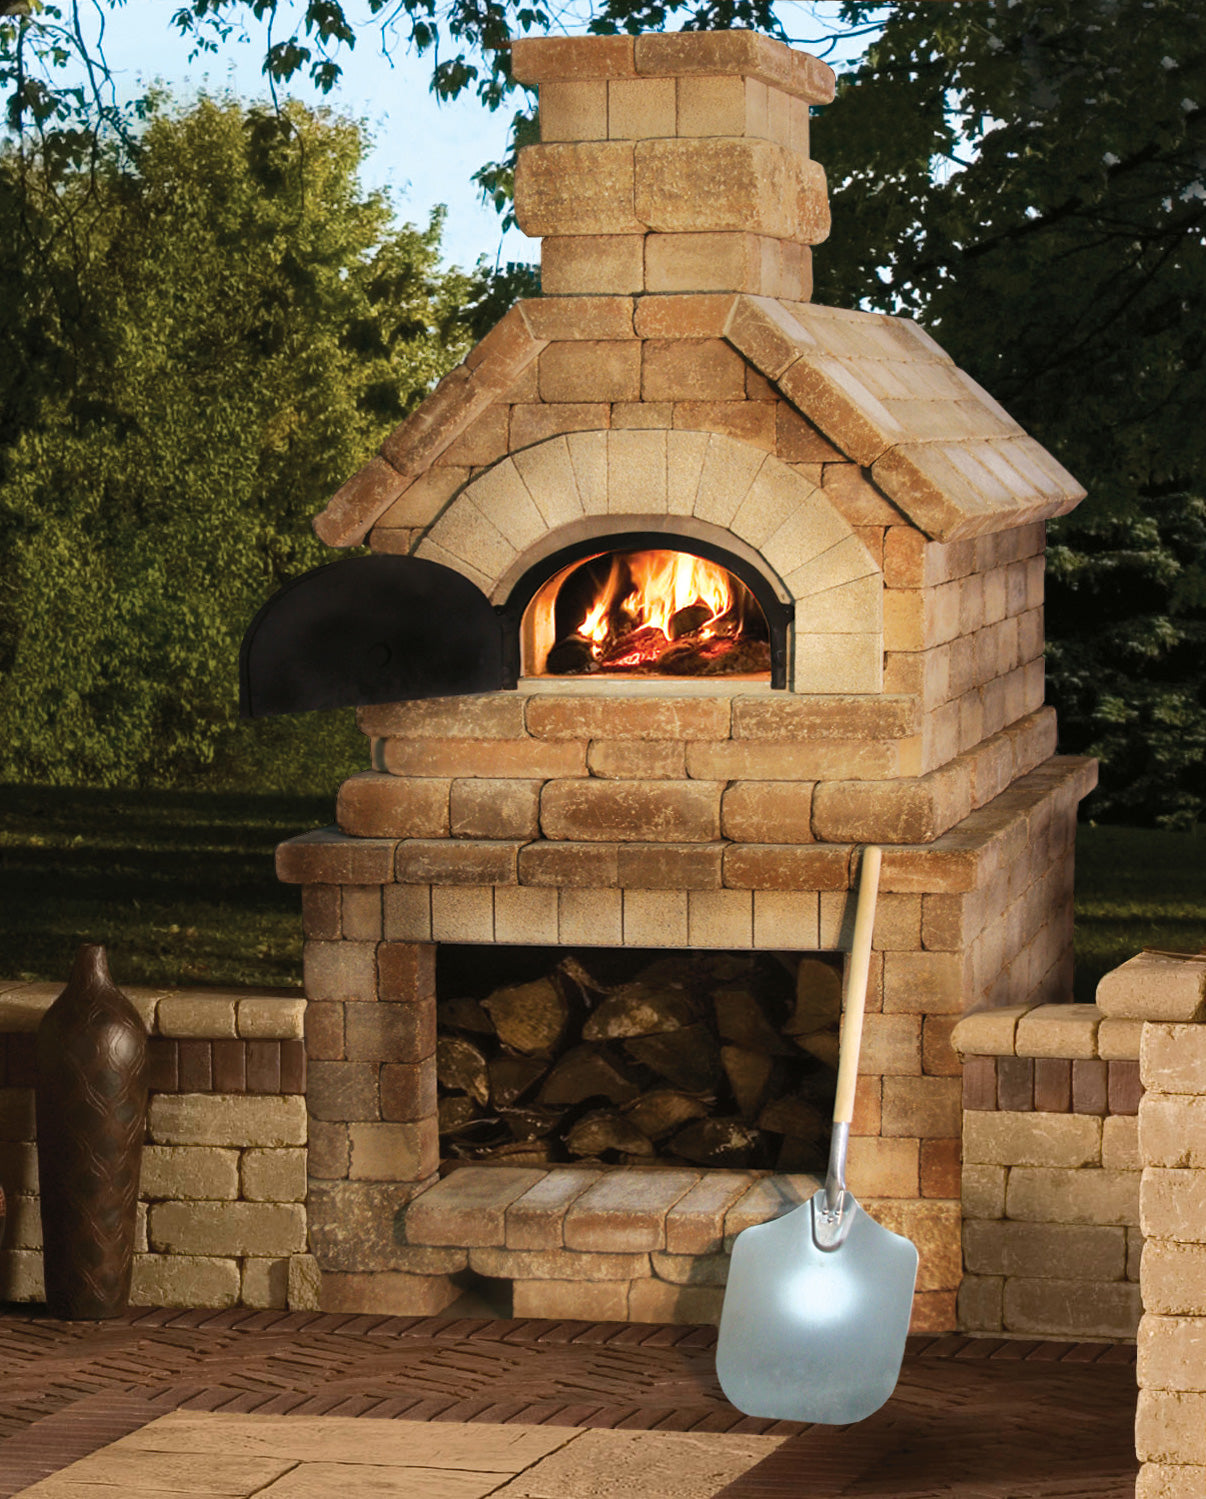 Chicago Brick Oven Wood-Fired Outdoor Pizza Oven, CBO-750 DIY Kit